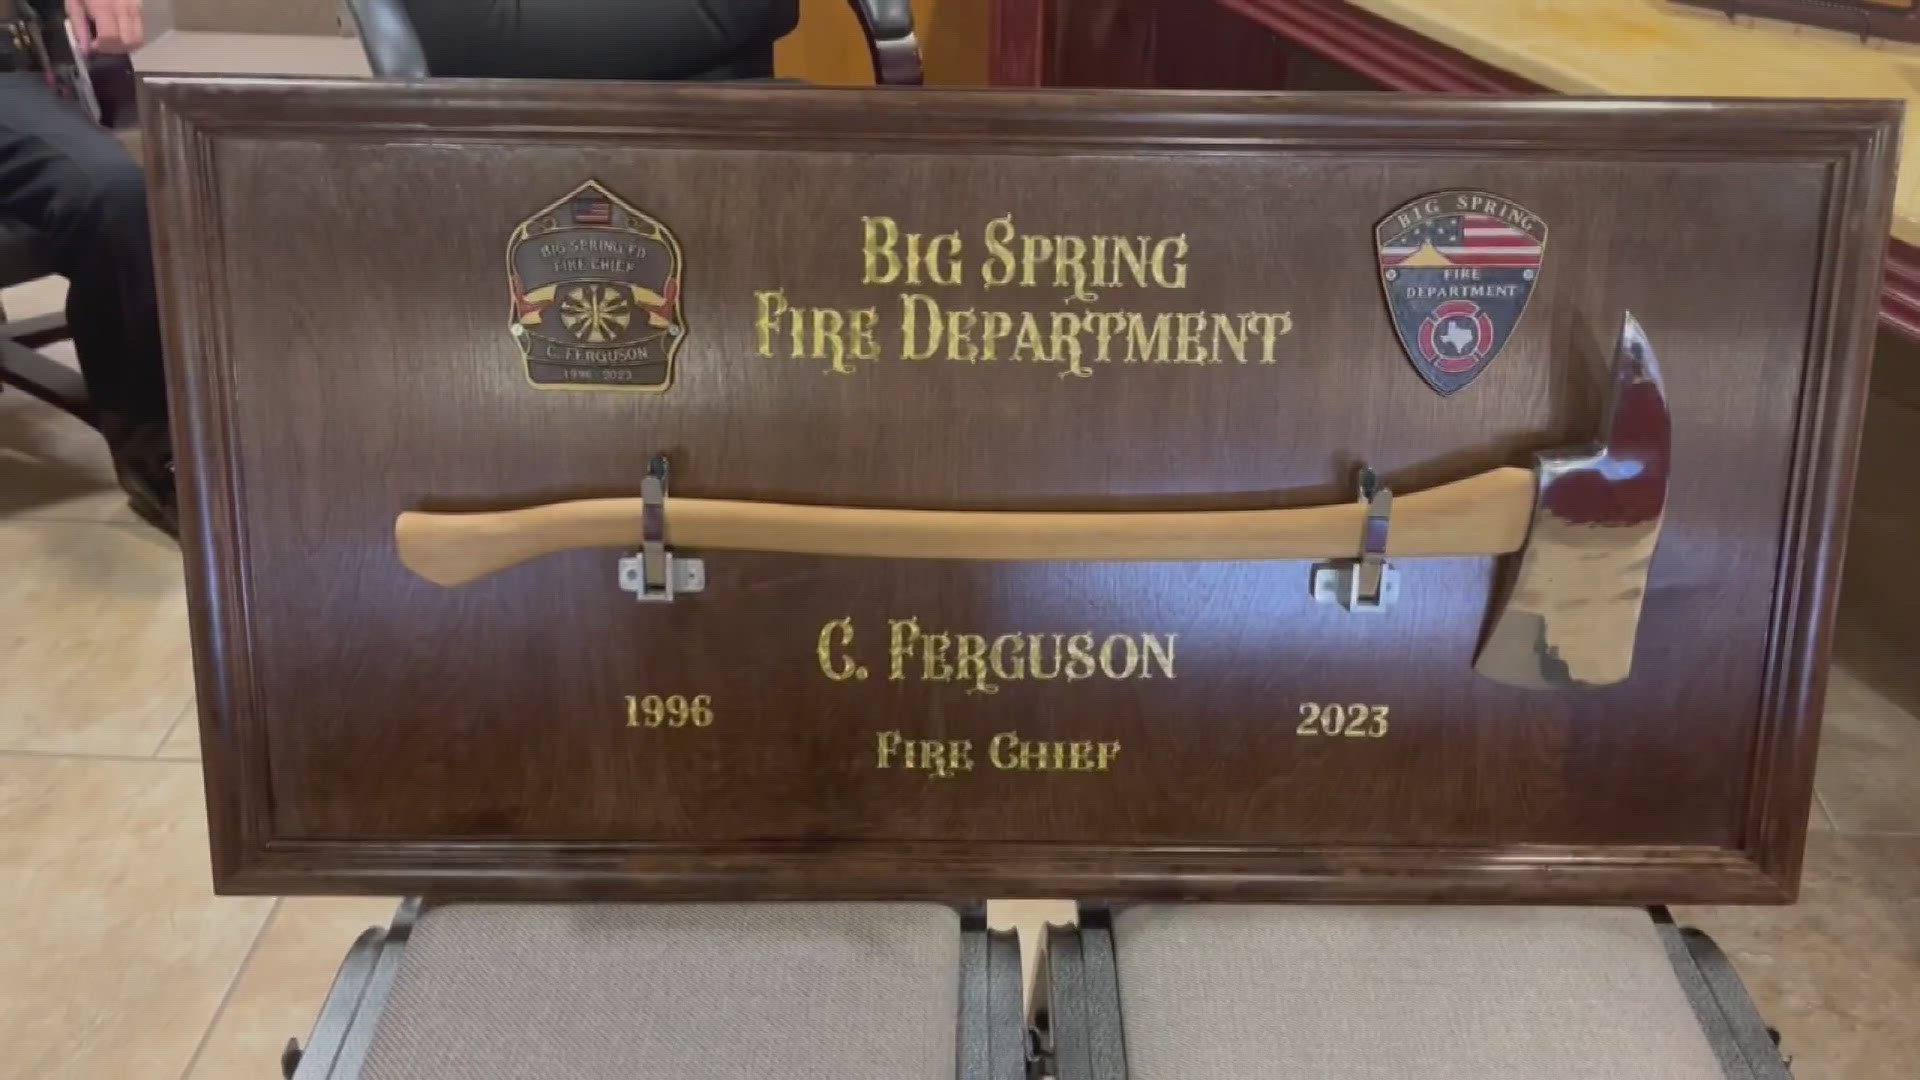 Craig Ferguson served the Big Spring community for 21 years, 11 as the Fire Chief.